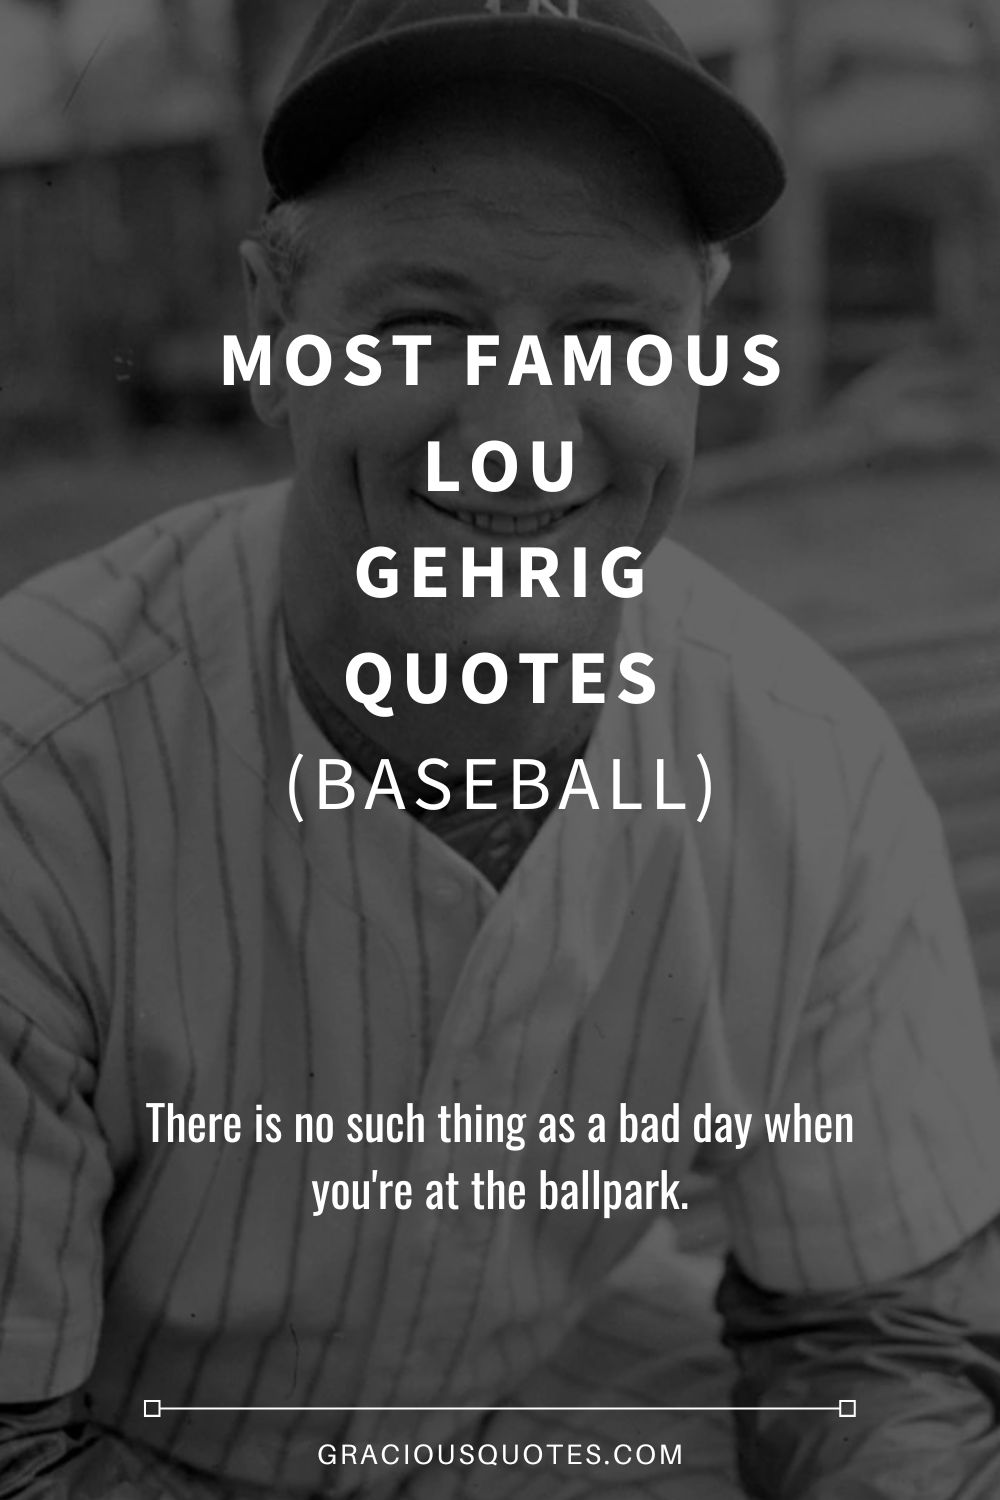 Most Famous Lou Gehrig Quotes (BASEBALL) - Gracious Quotes